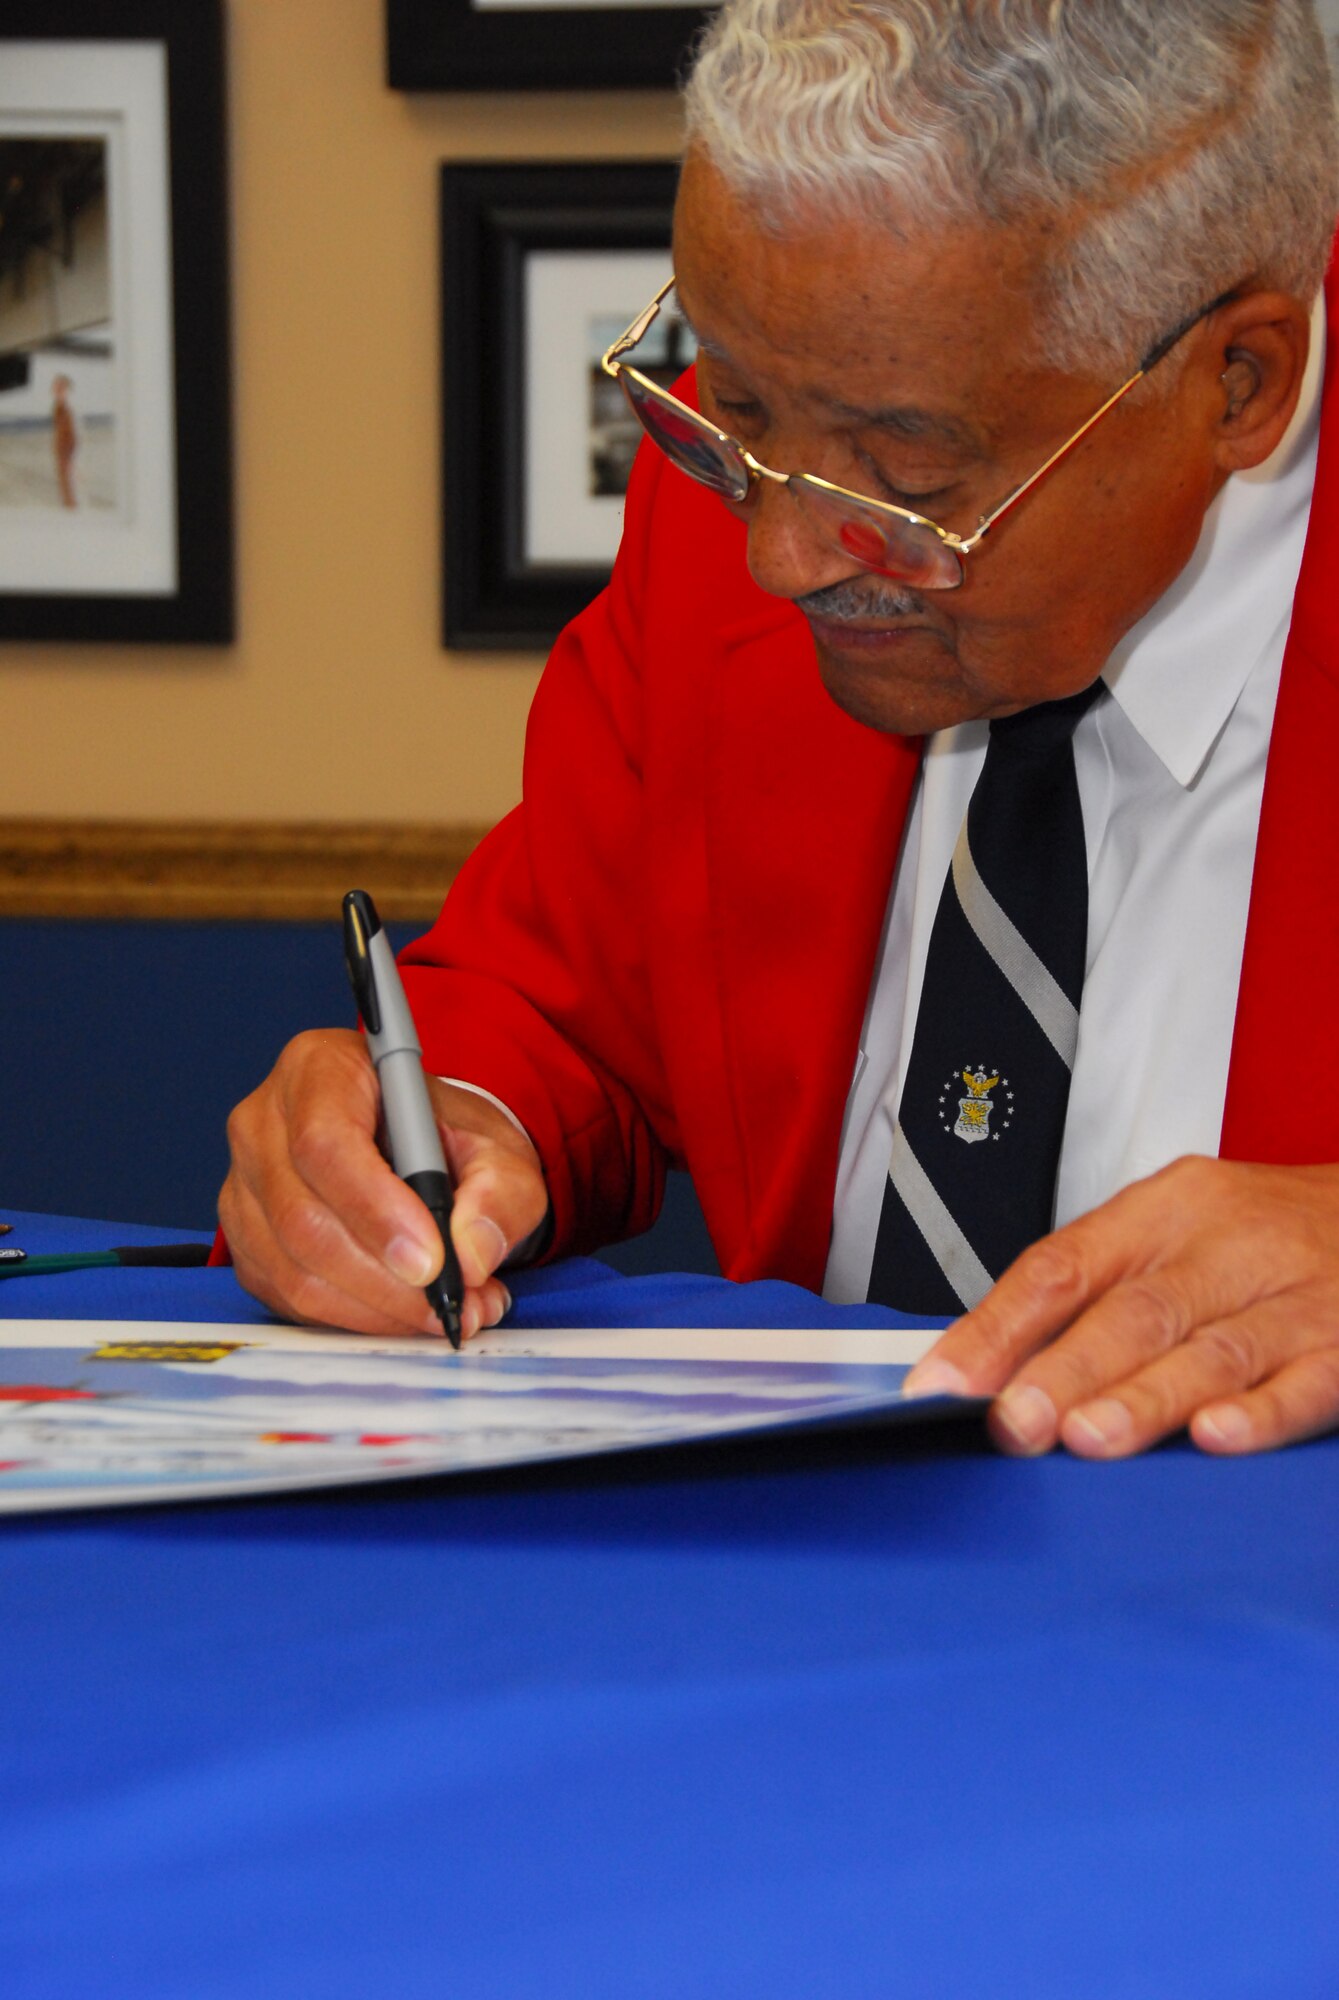 Retired Col. Charles McGee, one of the original Tuskegee Airmen, signs autographs after speaking to Squadron Officer School students at the Warrior Symposium Oct. 16.  (Air Force photo by Scoot Knuteson)